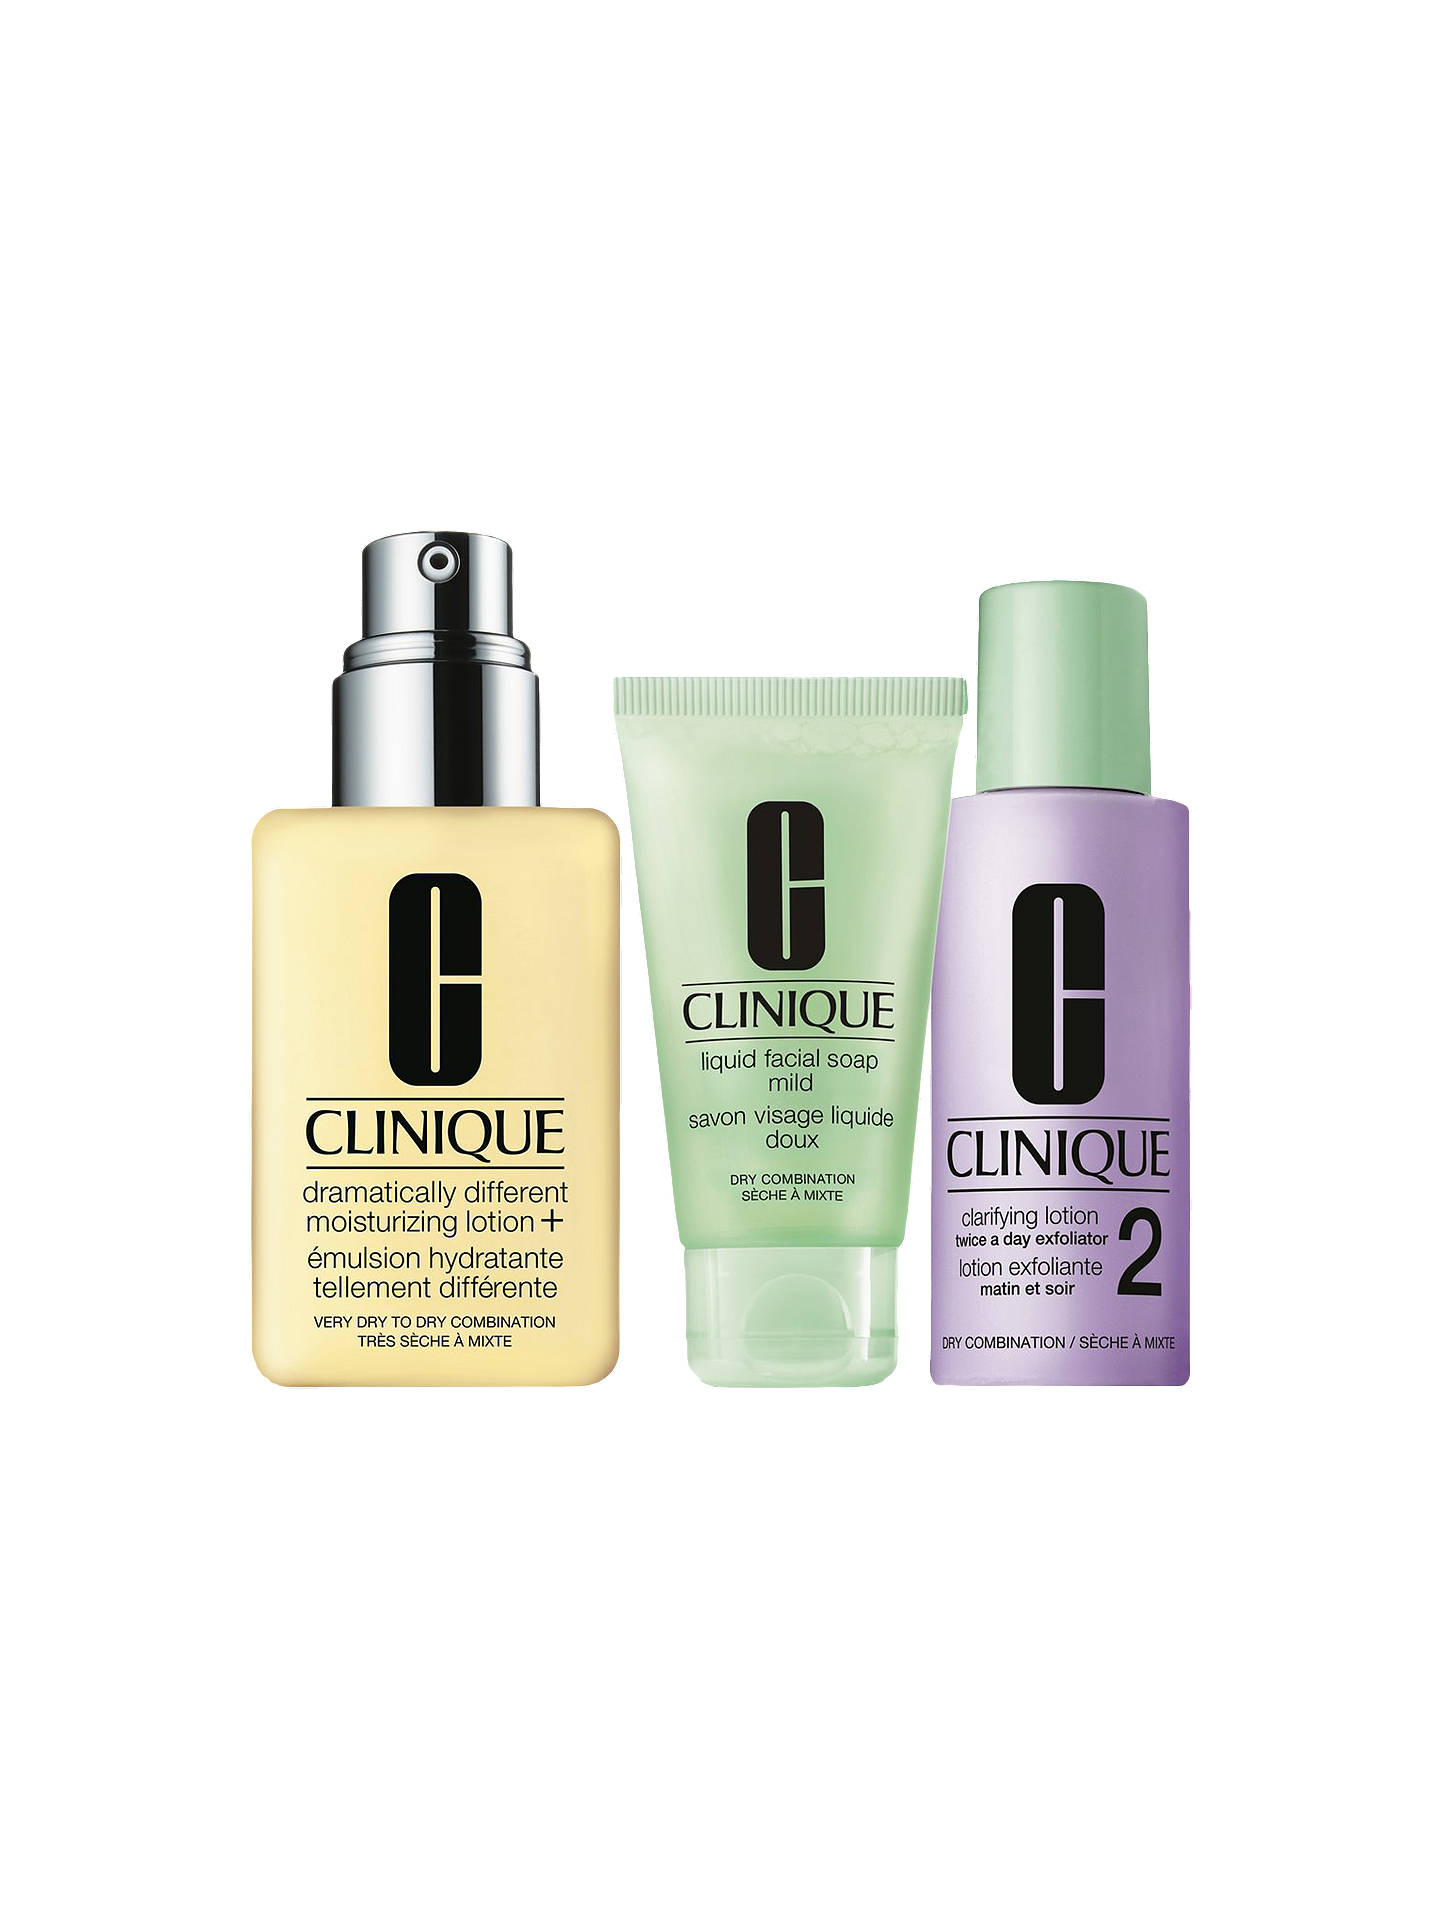 Clinique Dramatically Different Moisturising Lotion+ Skincare Gift Set ...